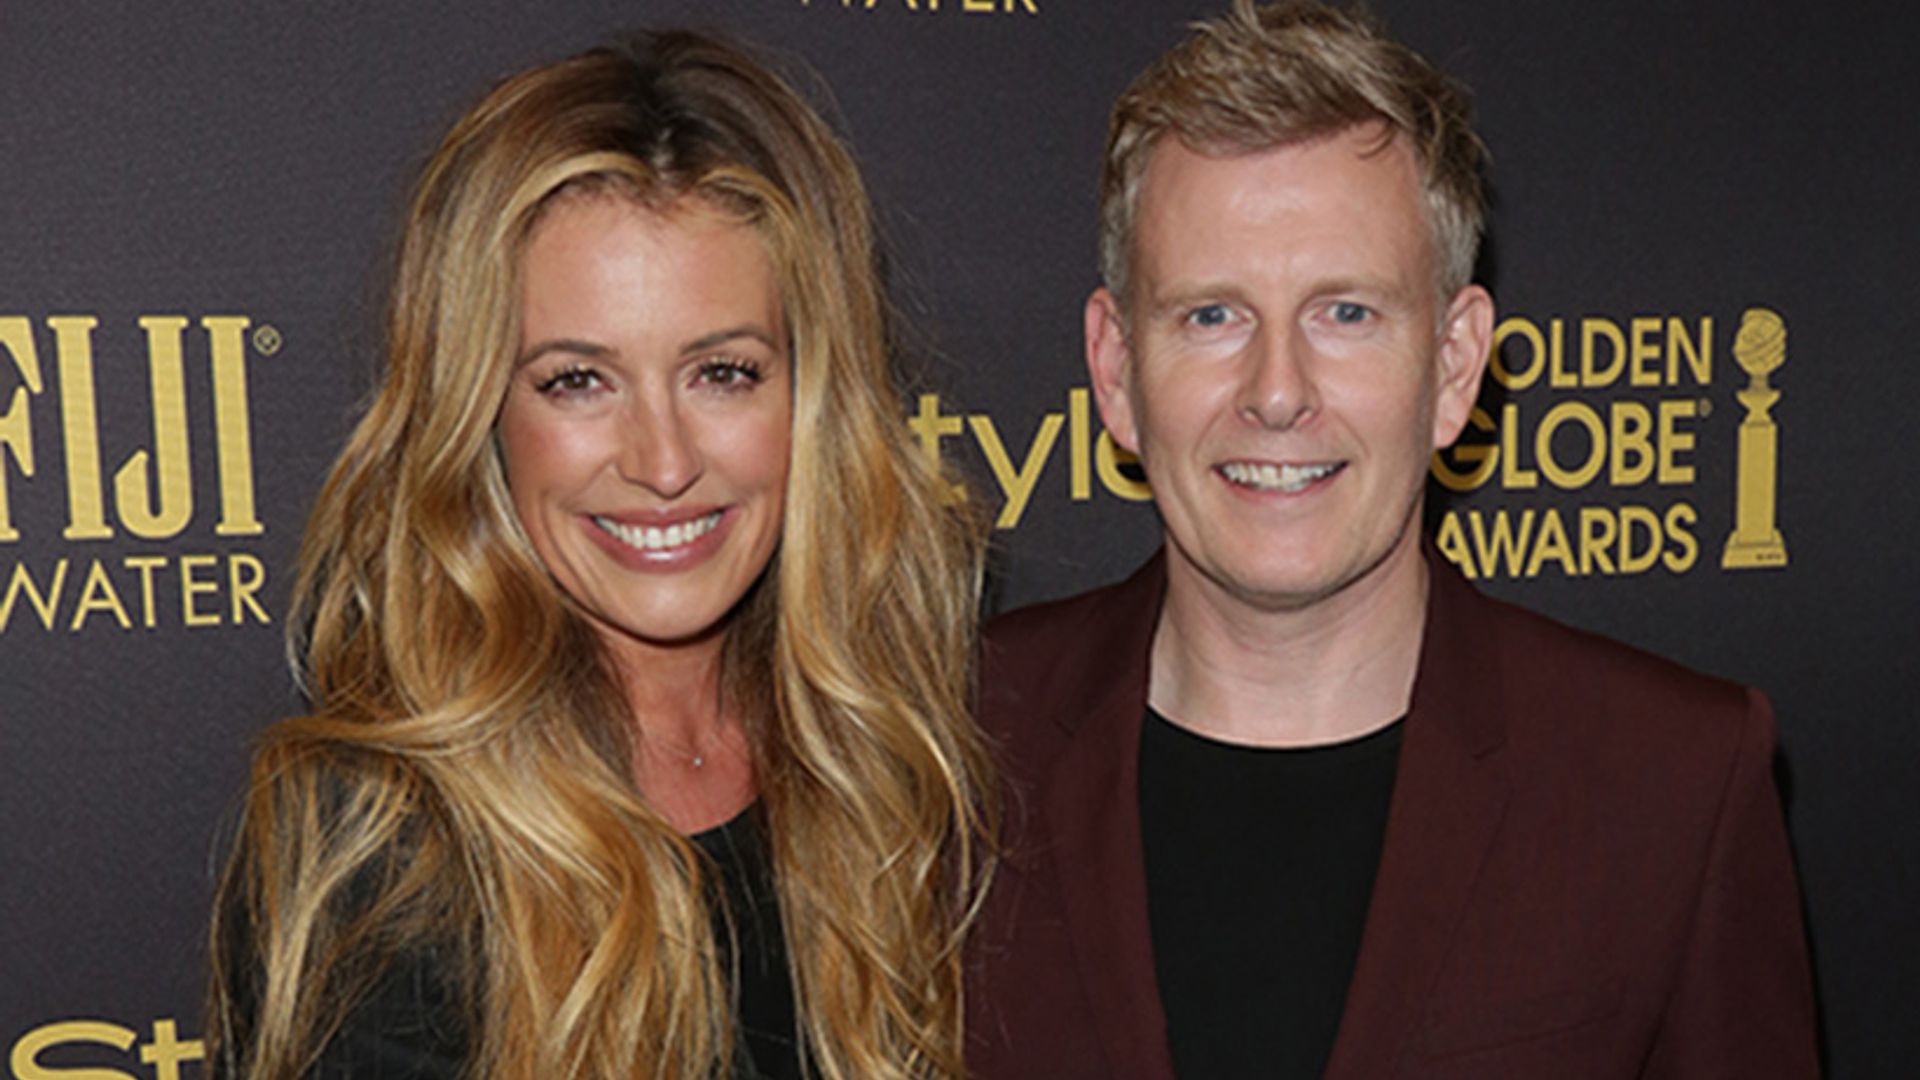 Cat Deeley opens up about her son Milo with husband Patrick Kielty and her surprise 40th birthday party!